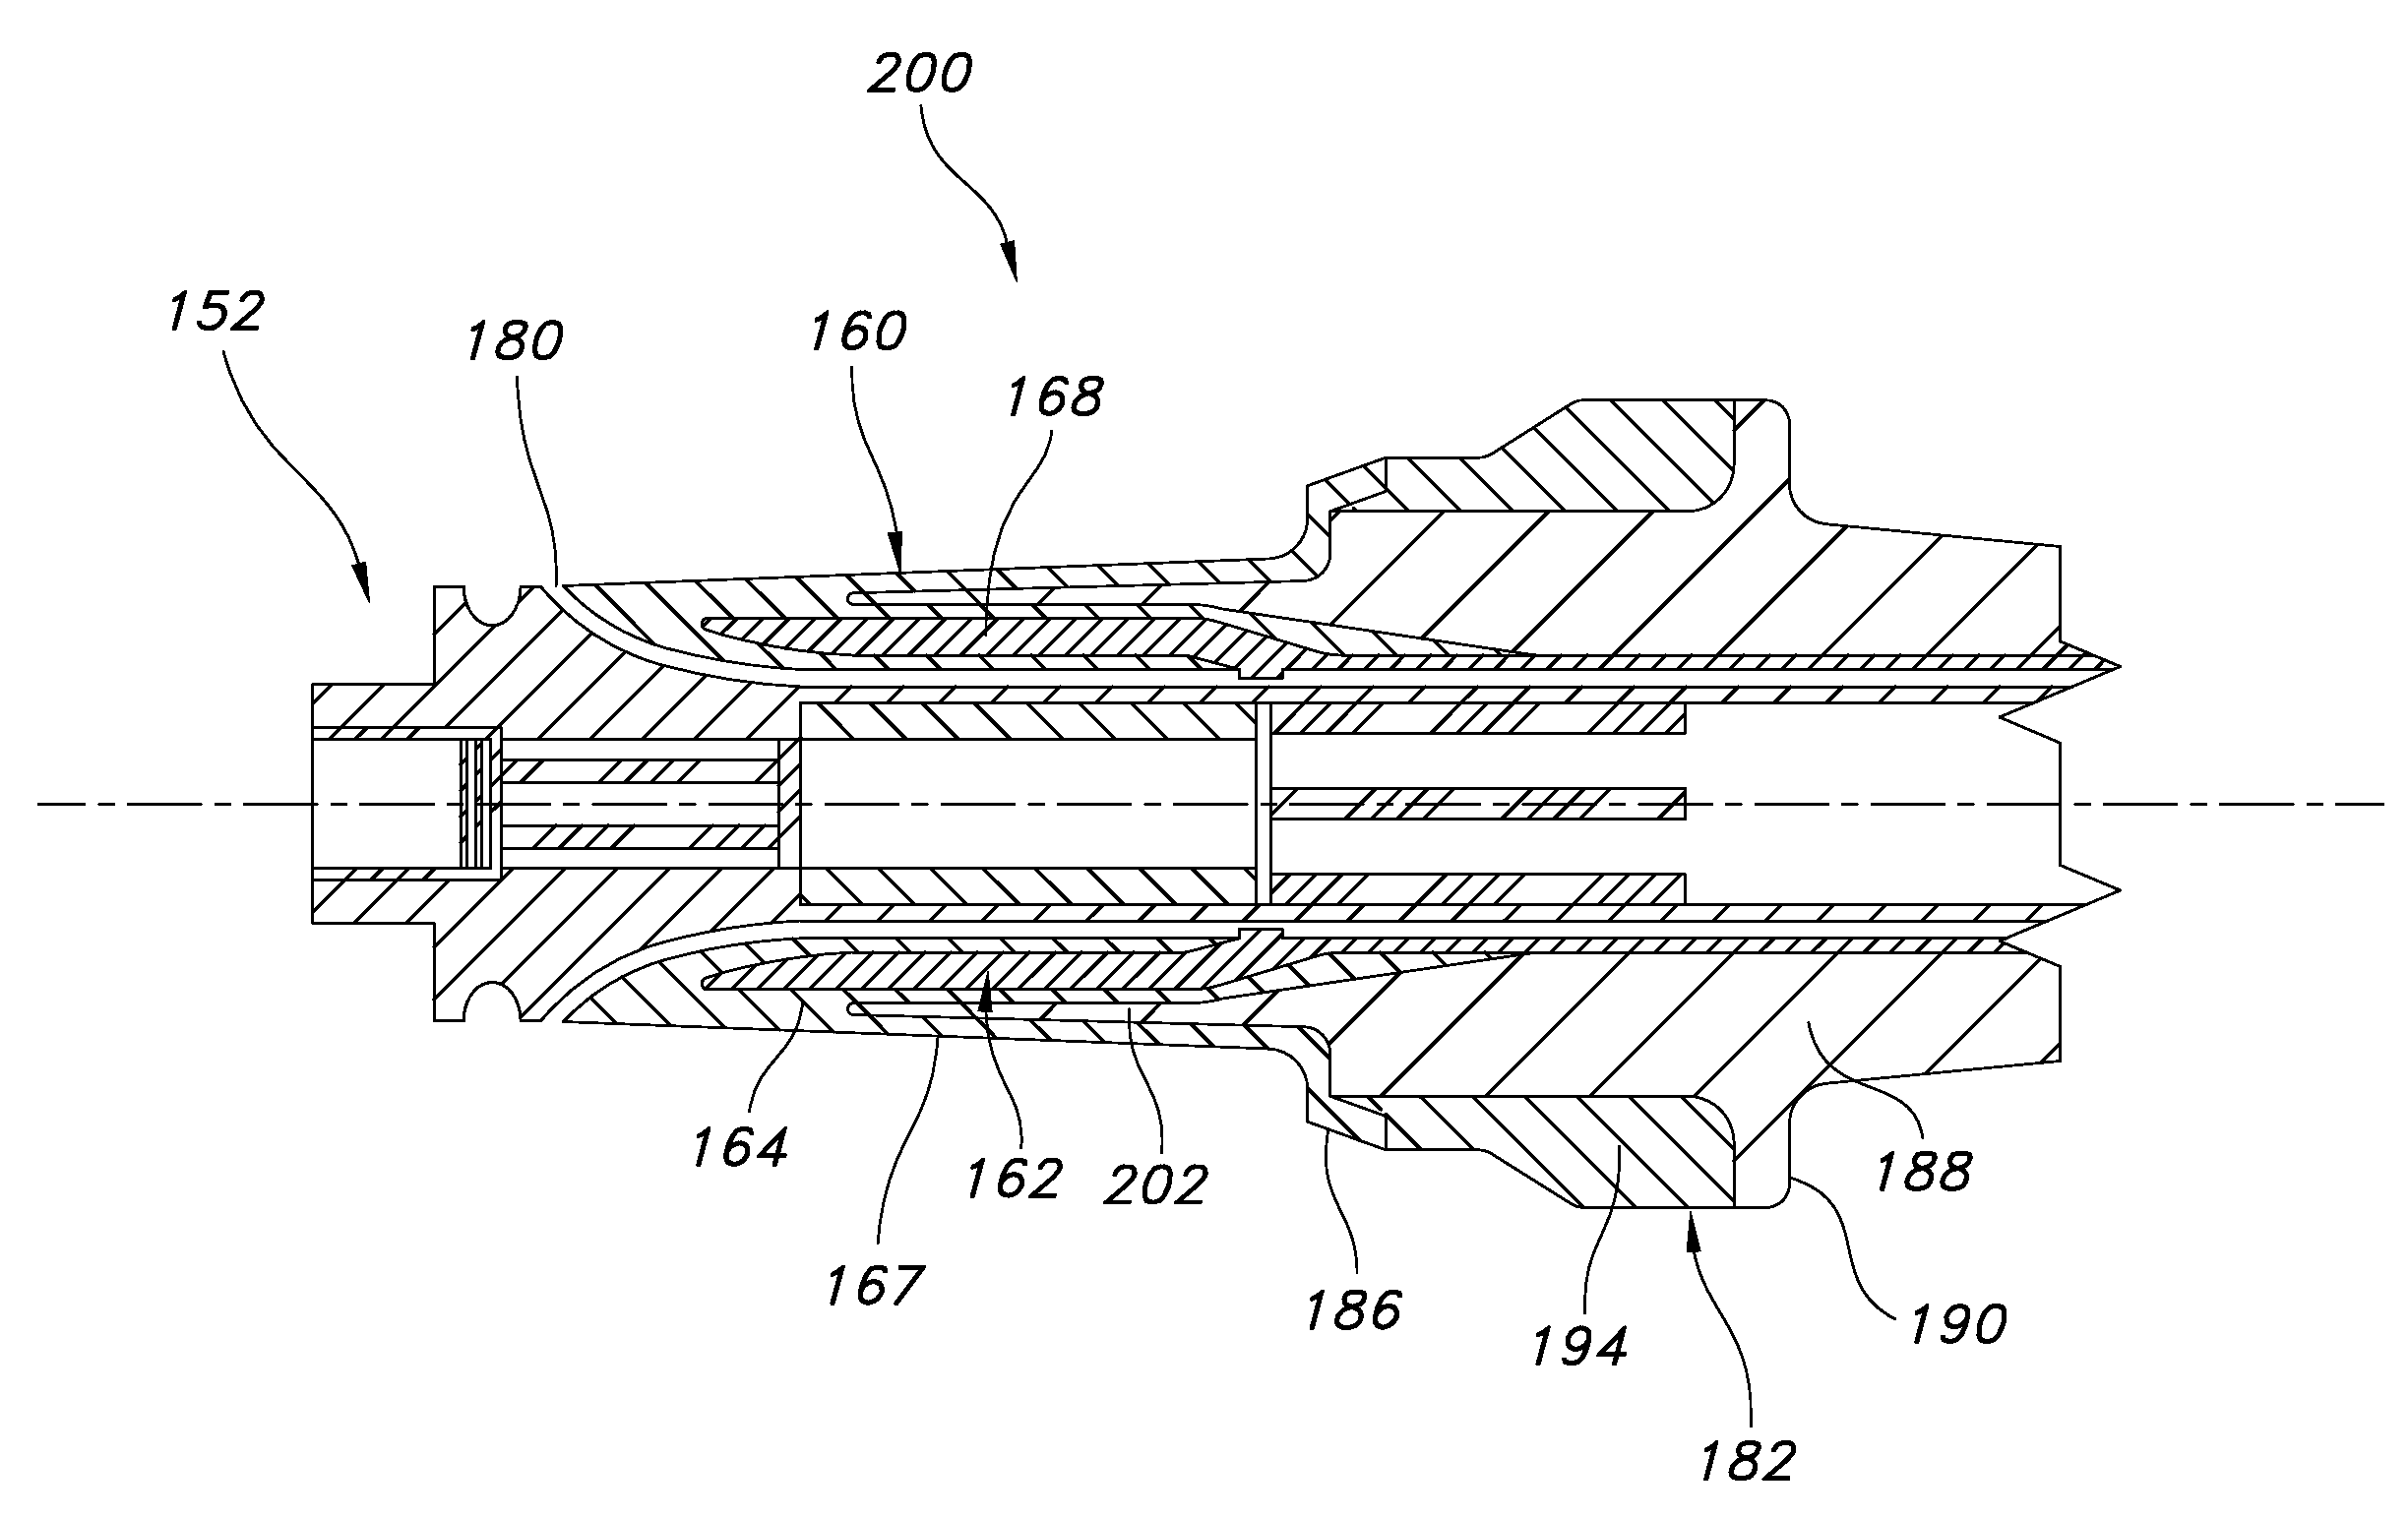 Thermoplastic interface and shield assembly for separable insulated connector system